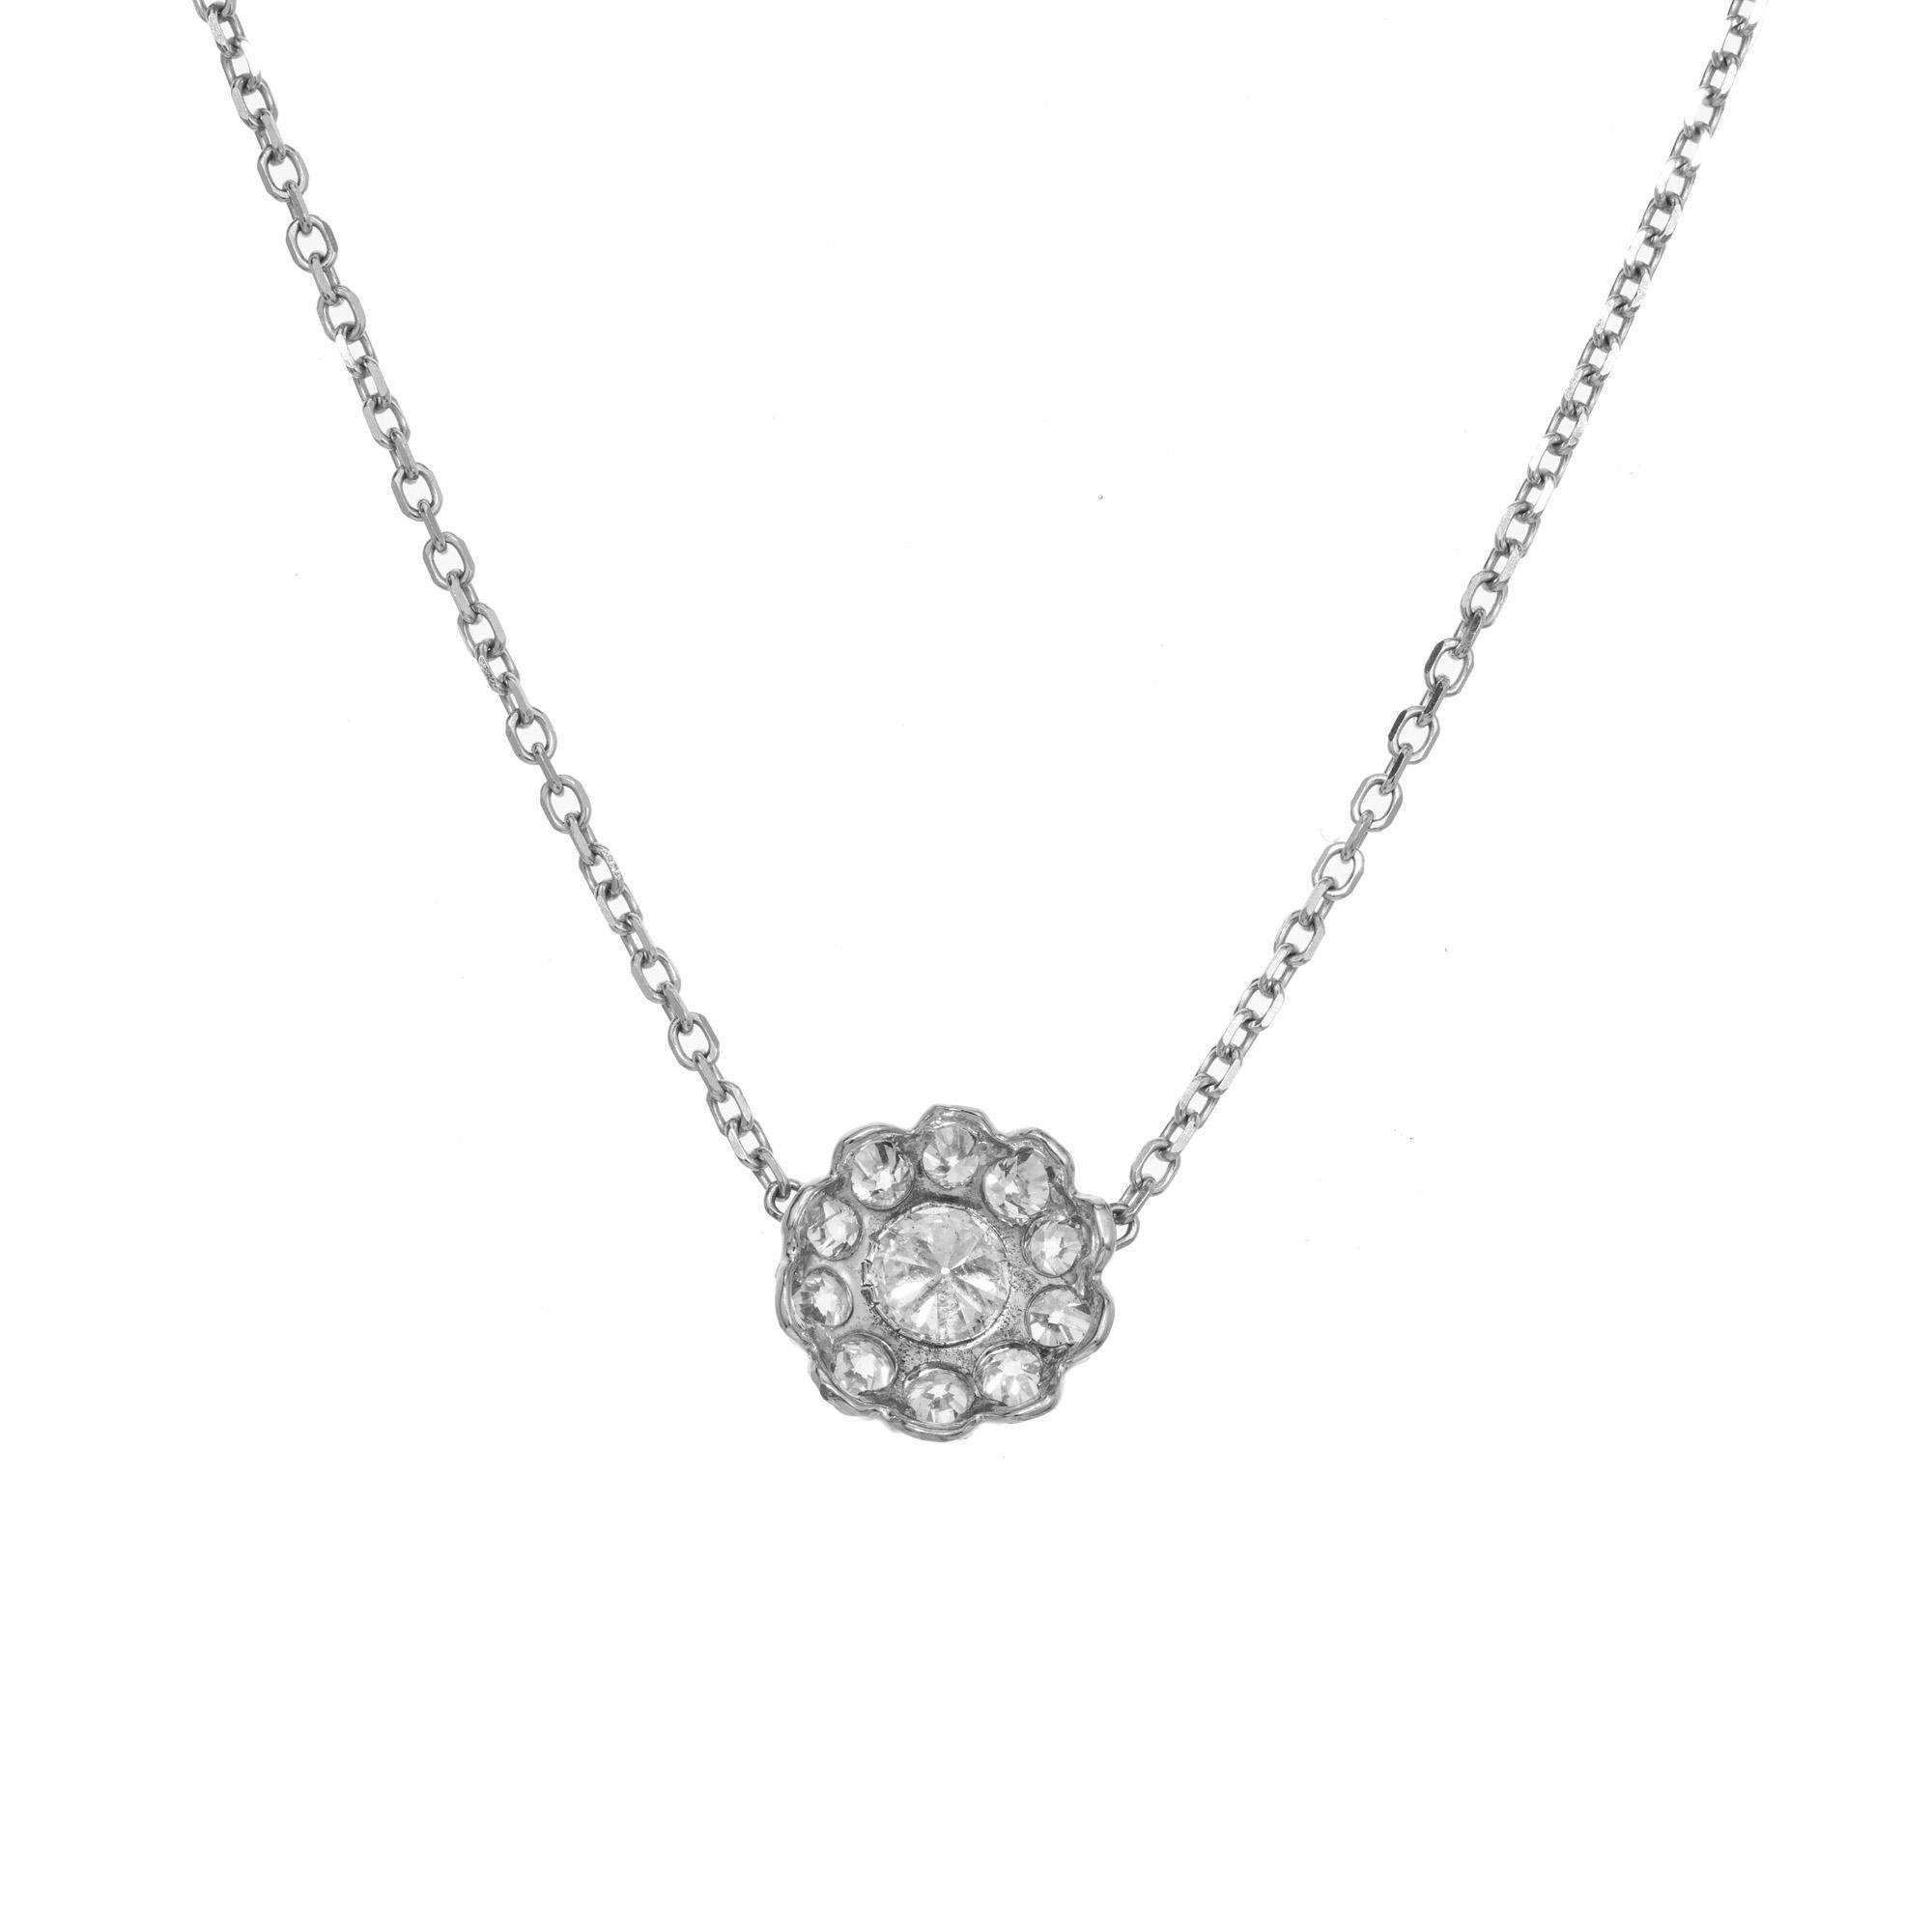 1.65 Carat Diamond White Gold Circle Cluster Art Deco Pendant Necklace  In Good Condition For Sale In Stamford, CT